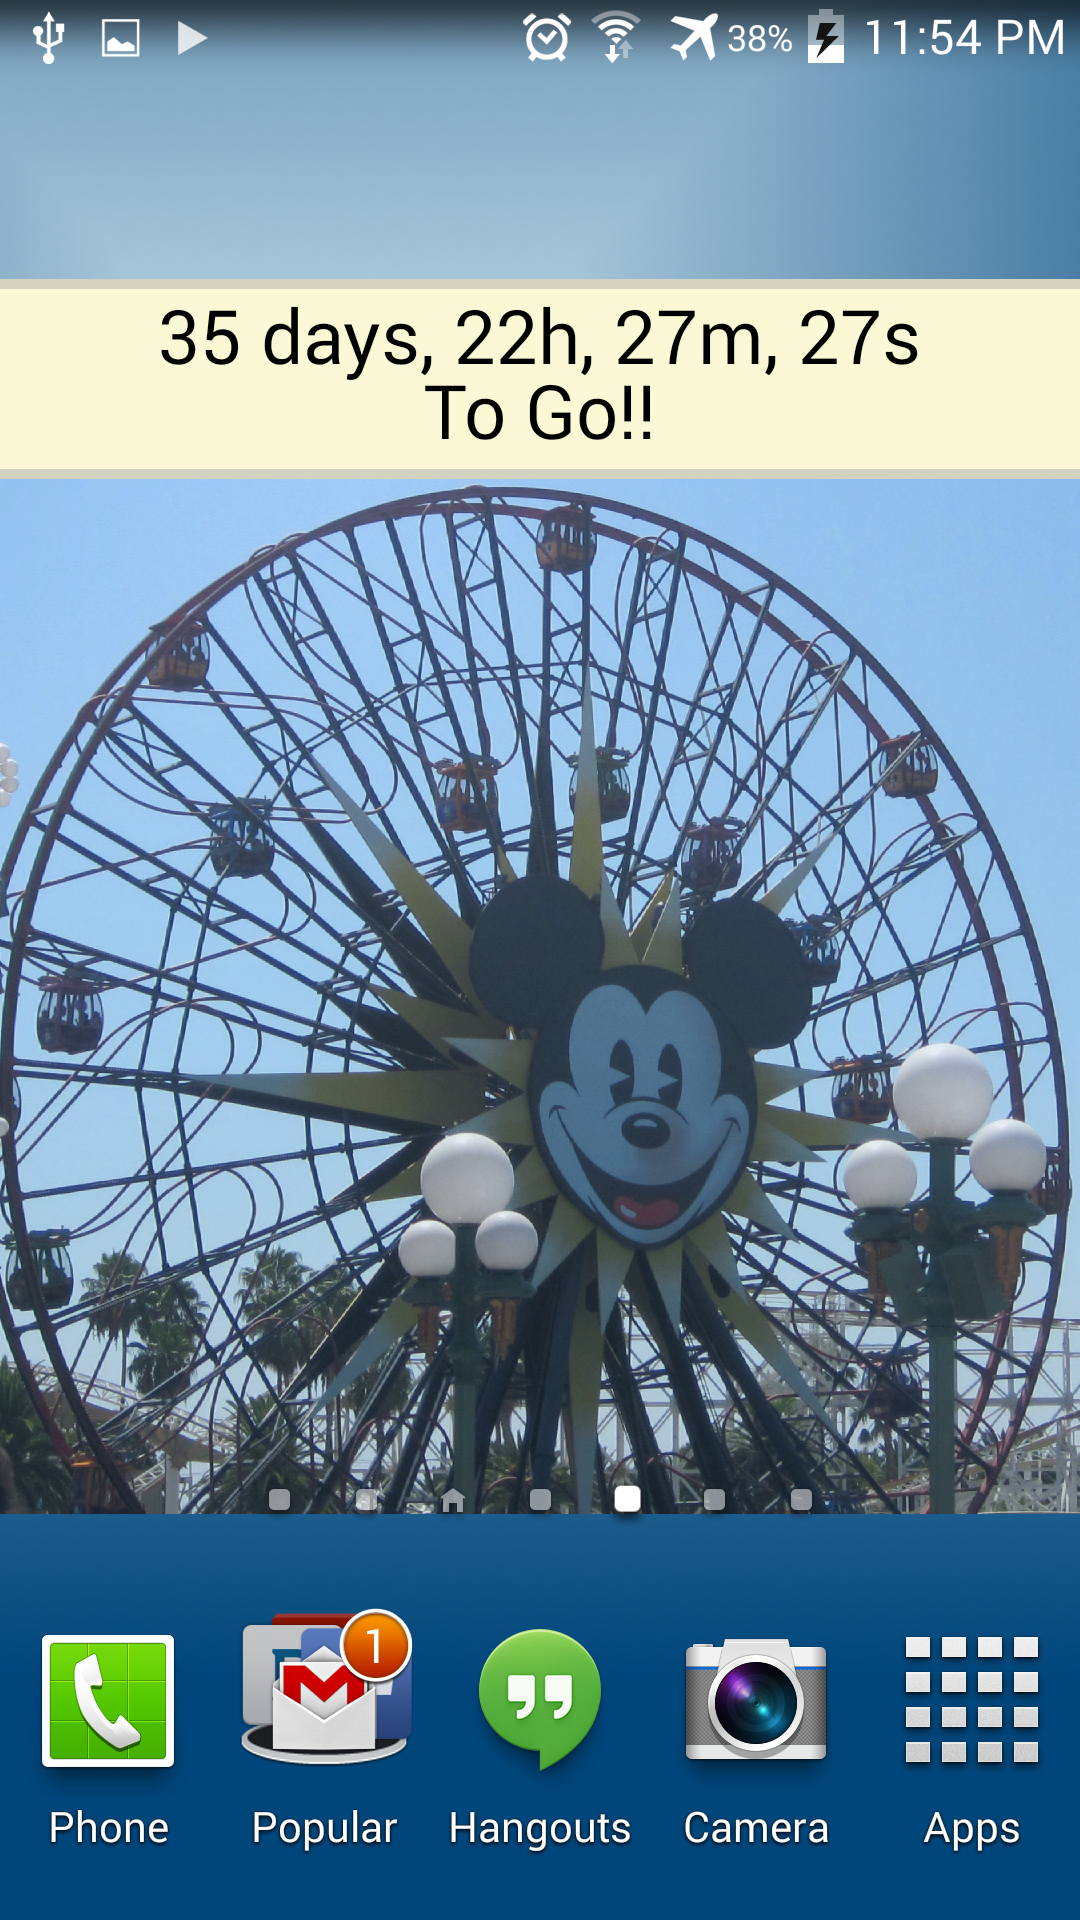 Android application Countdown for Disneyland Dlx screenshort